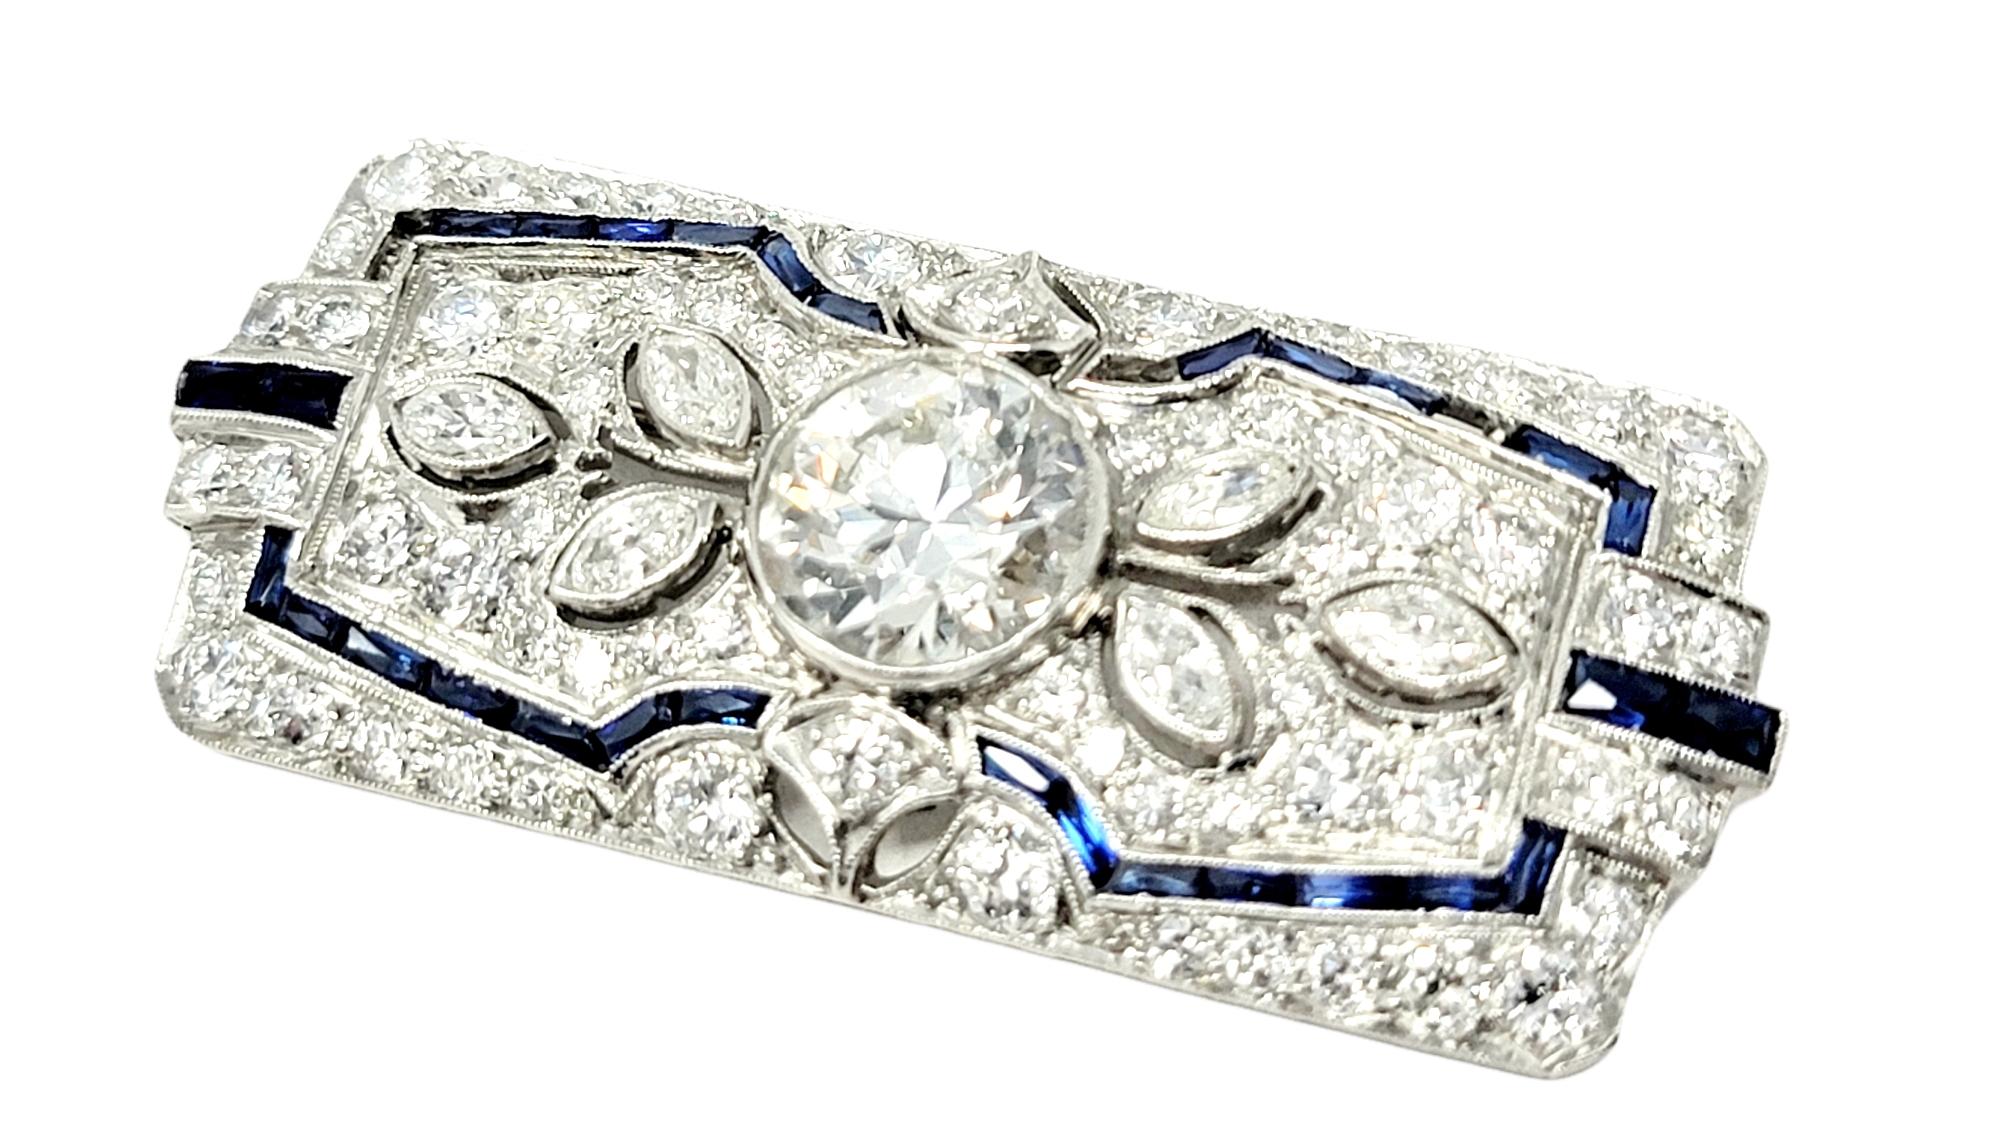 This exquisite vintage diamond and sapphire brooch is a true work of art. Stunning and shimmering, this piece is bursting with incredible sparkle and a touch of color.  The elegant platinum brooch features a sizeable bezel set early modern brilliant